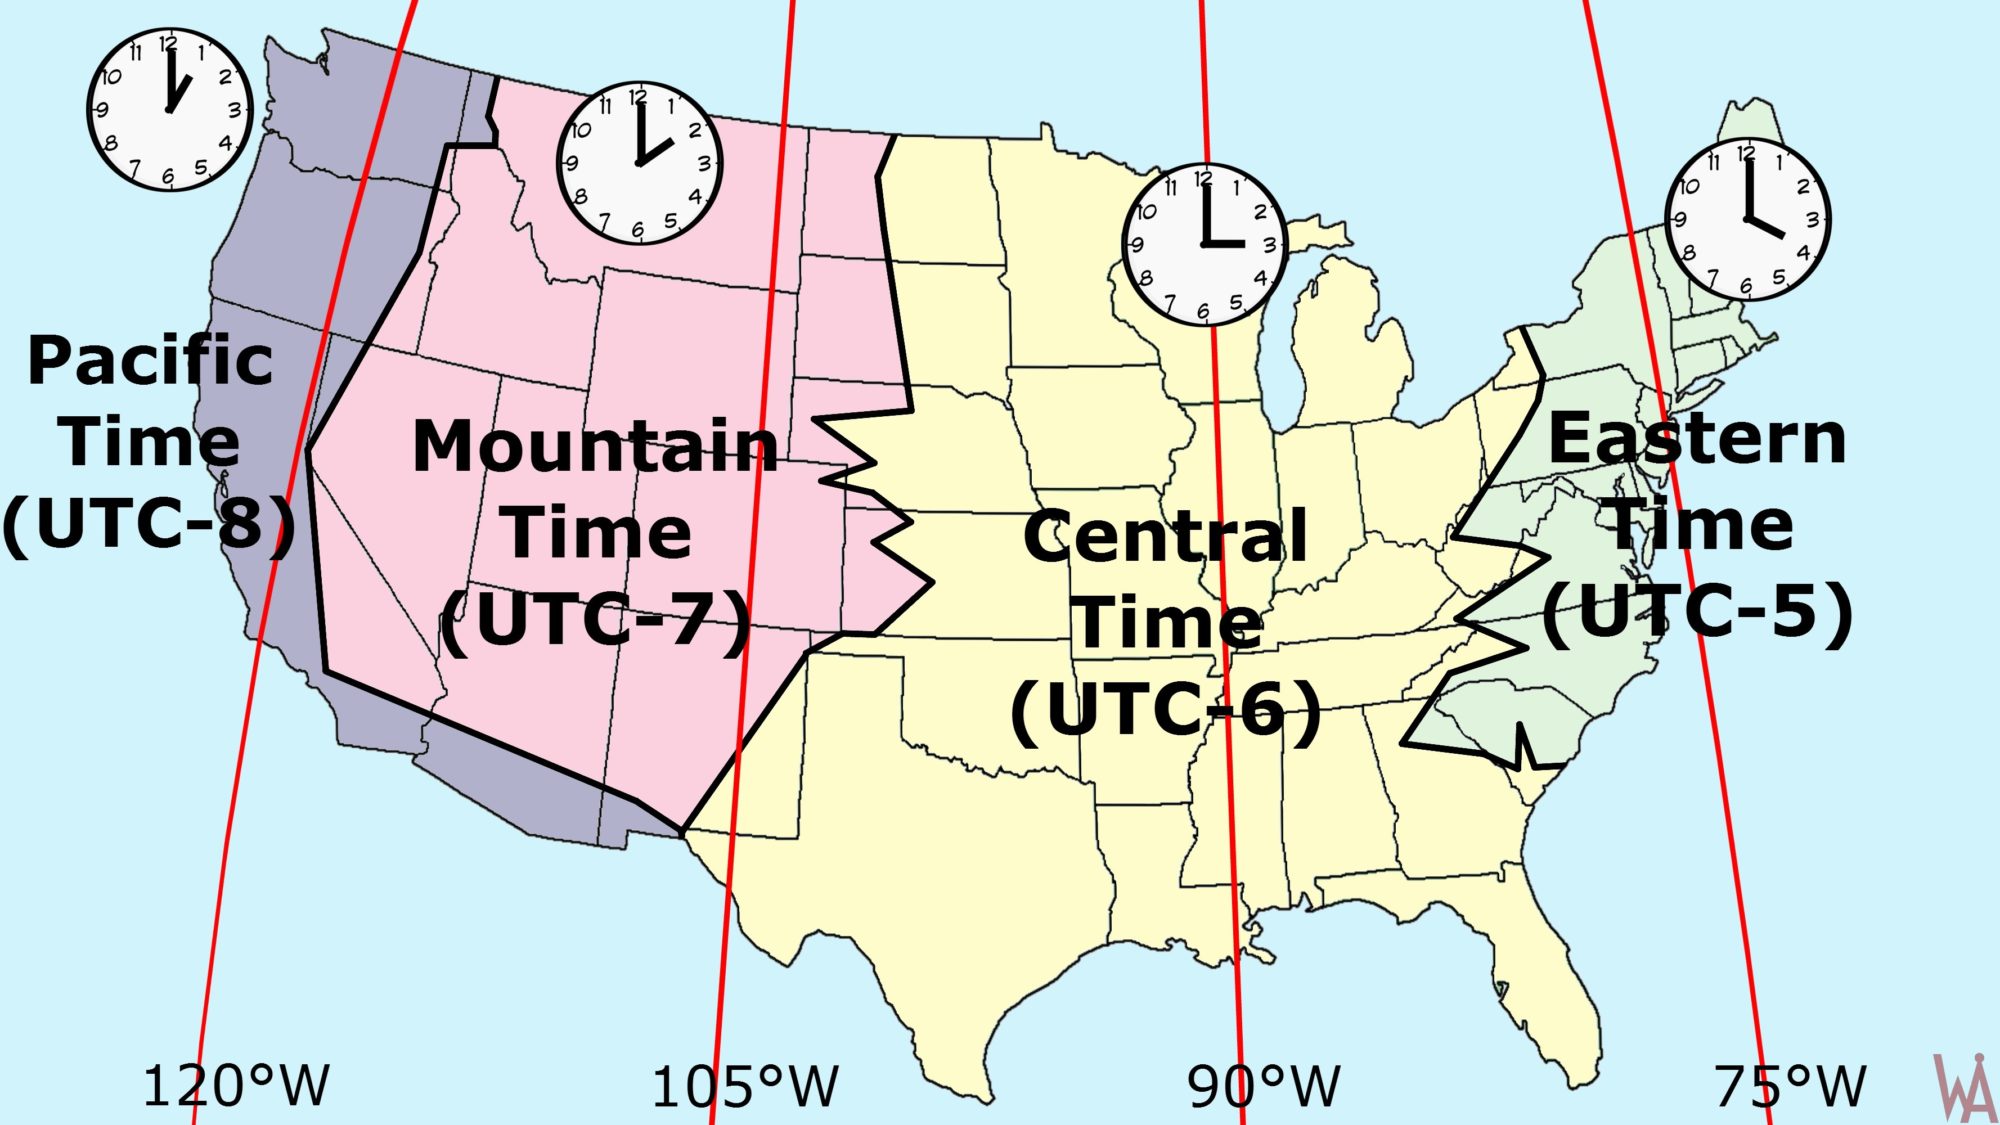 Time Zone Map of the USA. Most Popular Time Zone Map